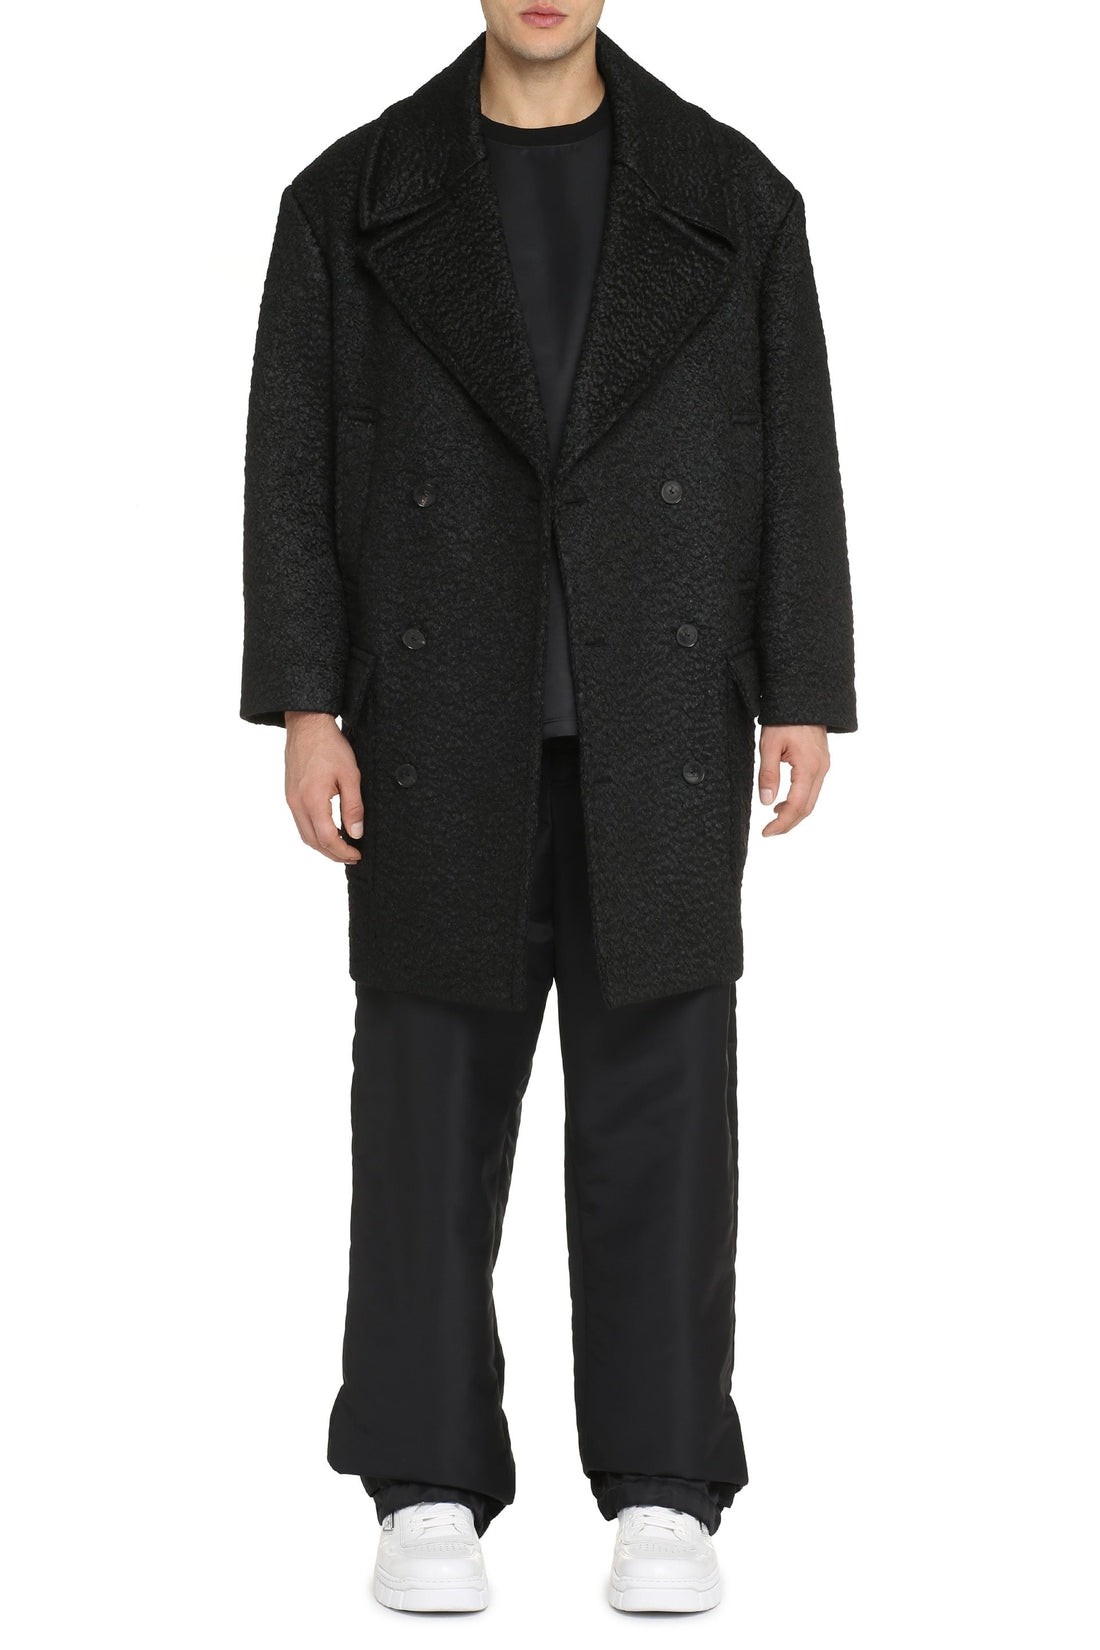 Valentino-OUTLET-SALE-Wool blend double-breasted coat-ARCHIVIST